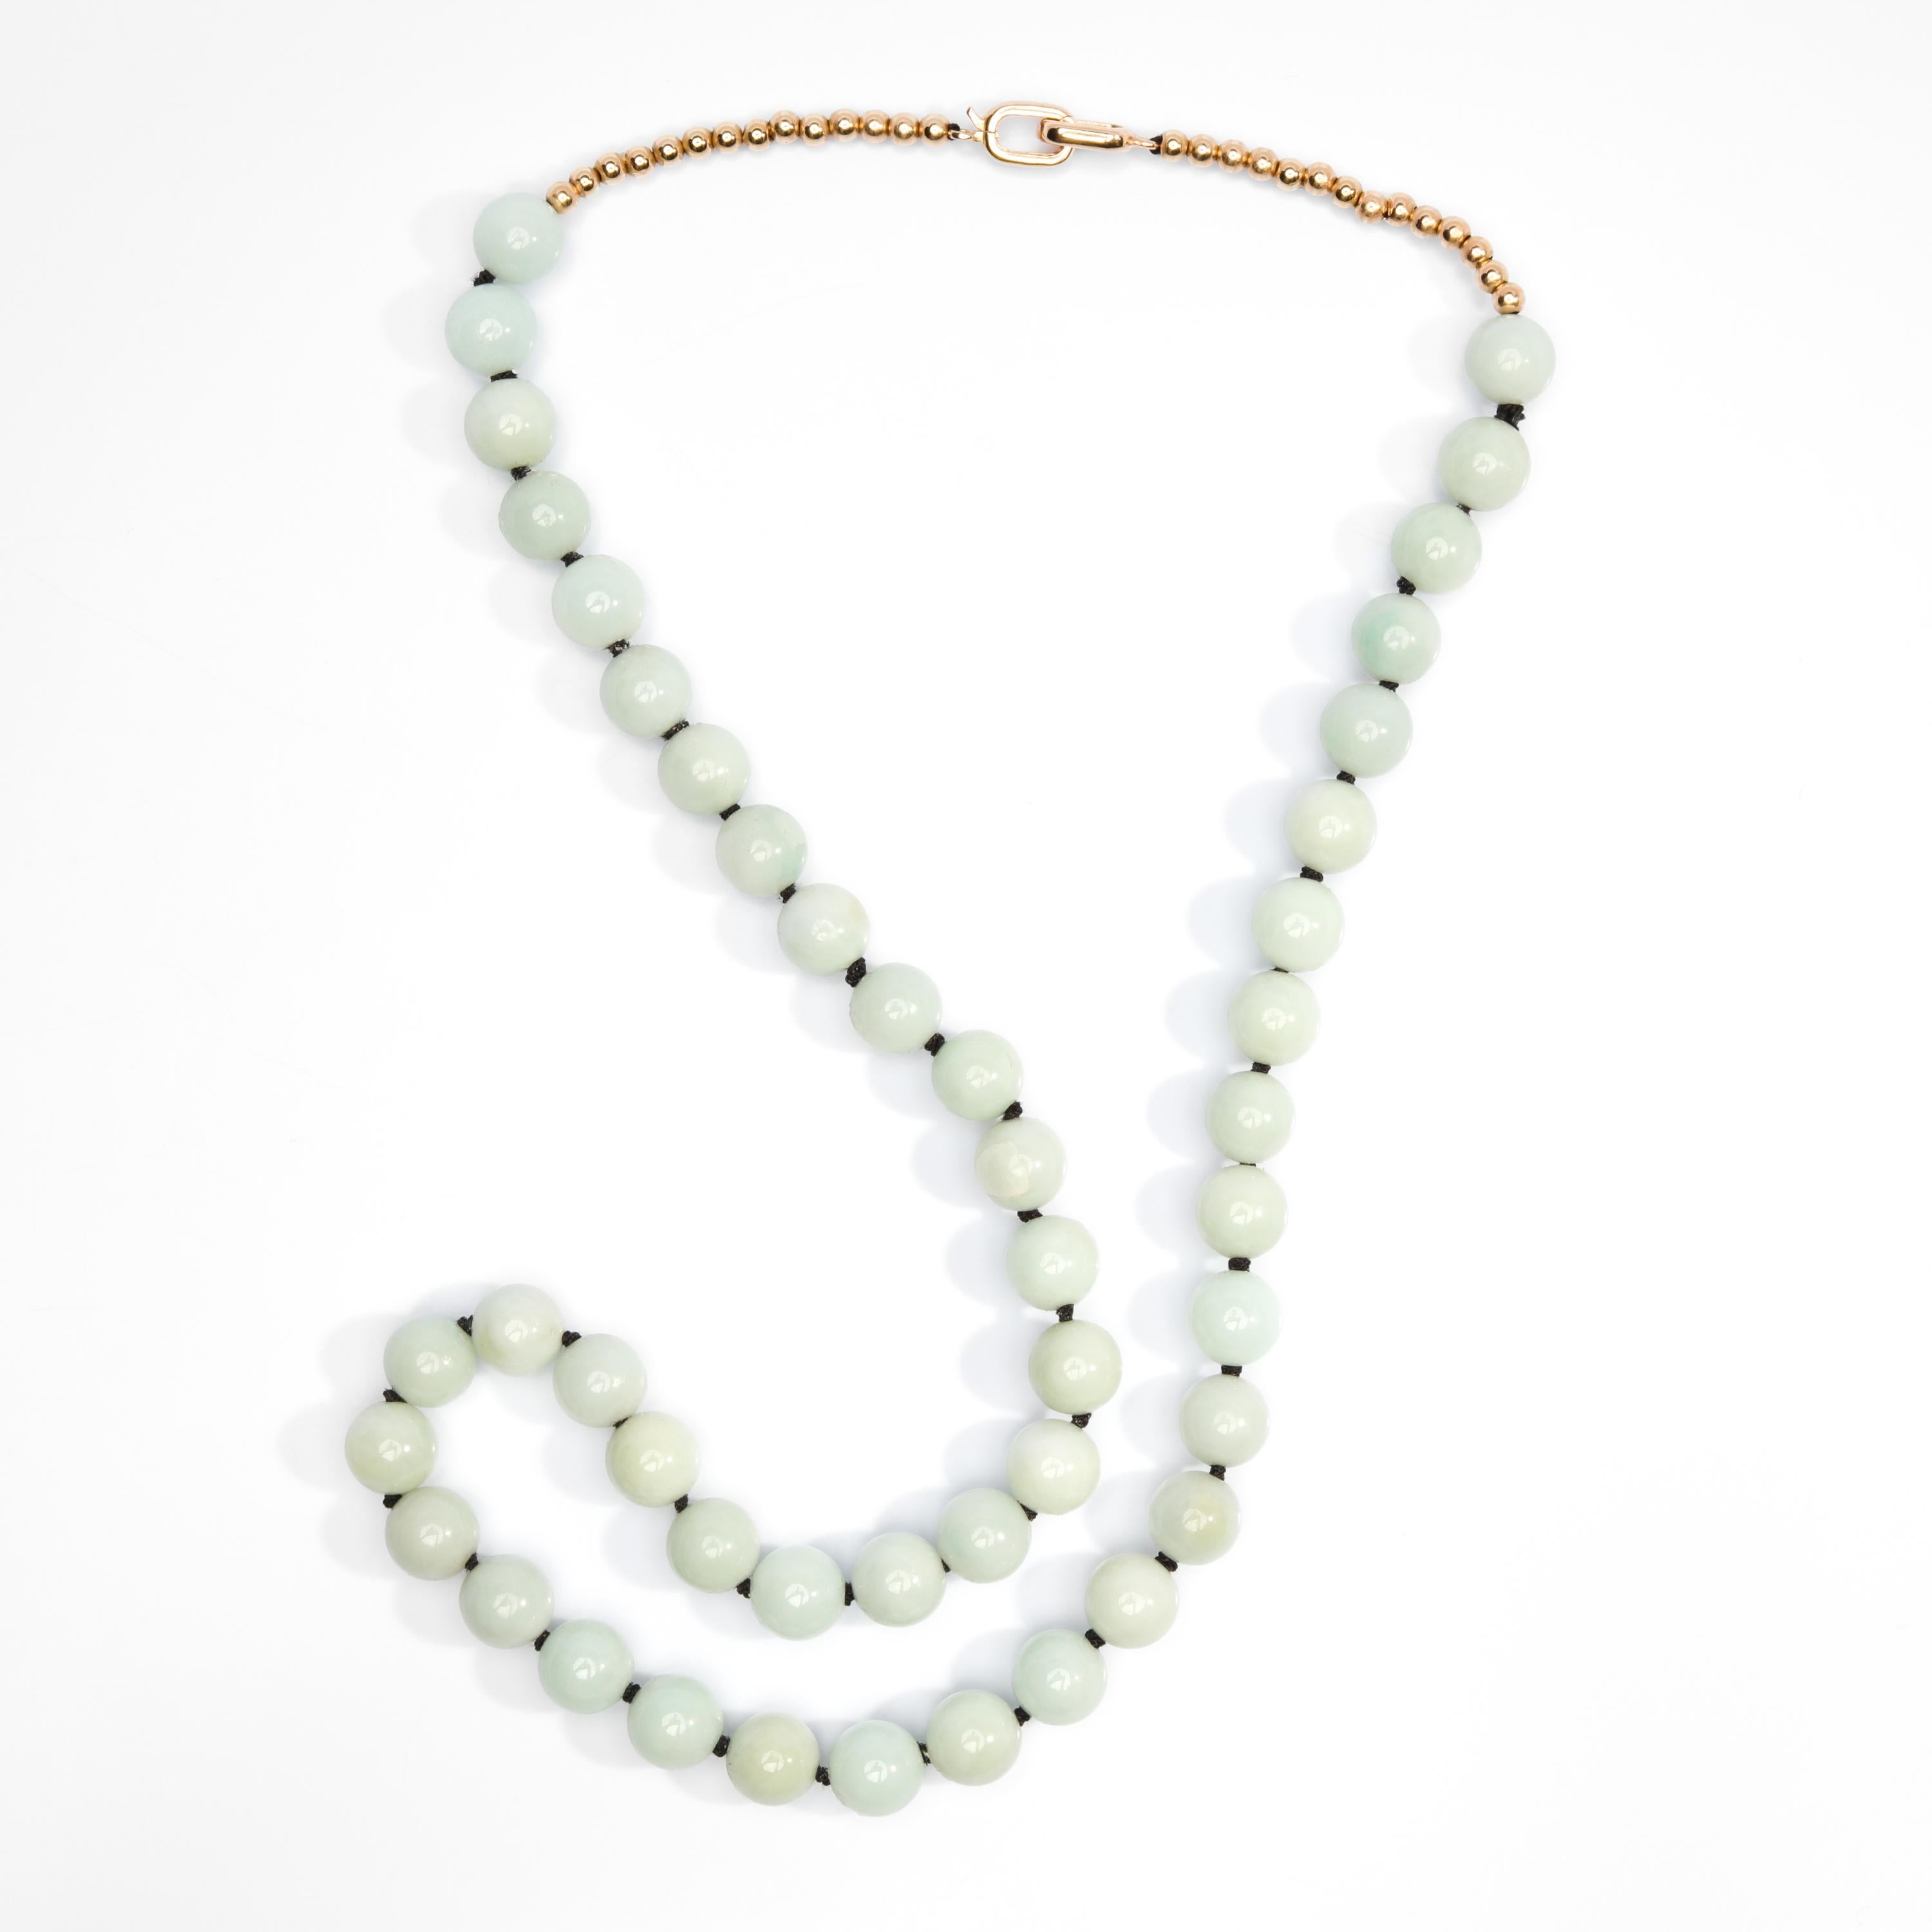 Composed of 46 natural, untreated opaque Burmese jadeite jade beads in a soft bluish-green, this beautiful and understated necklace serves as 